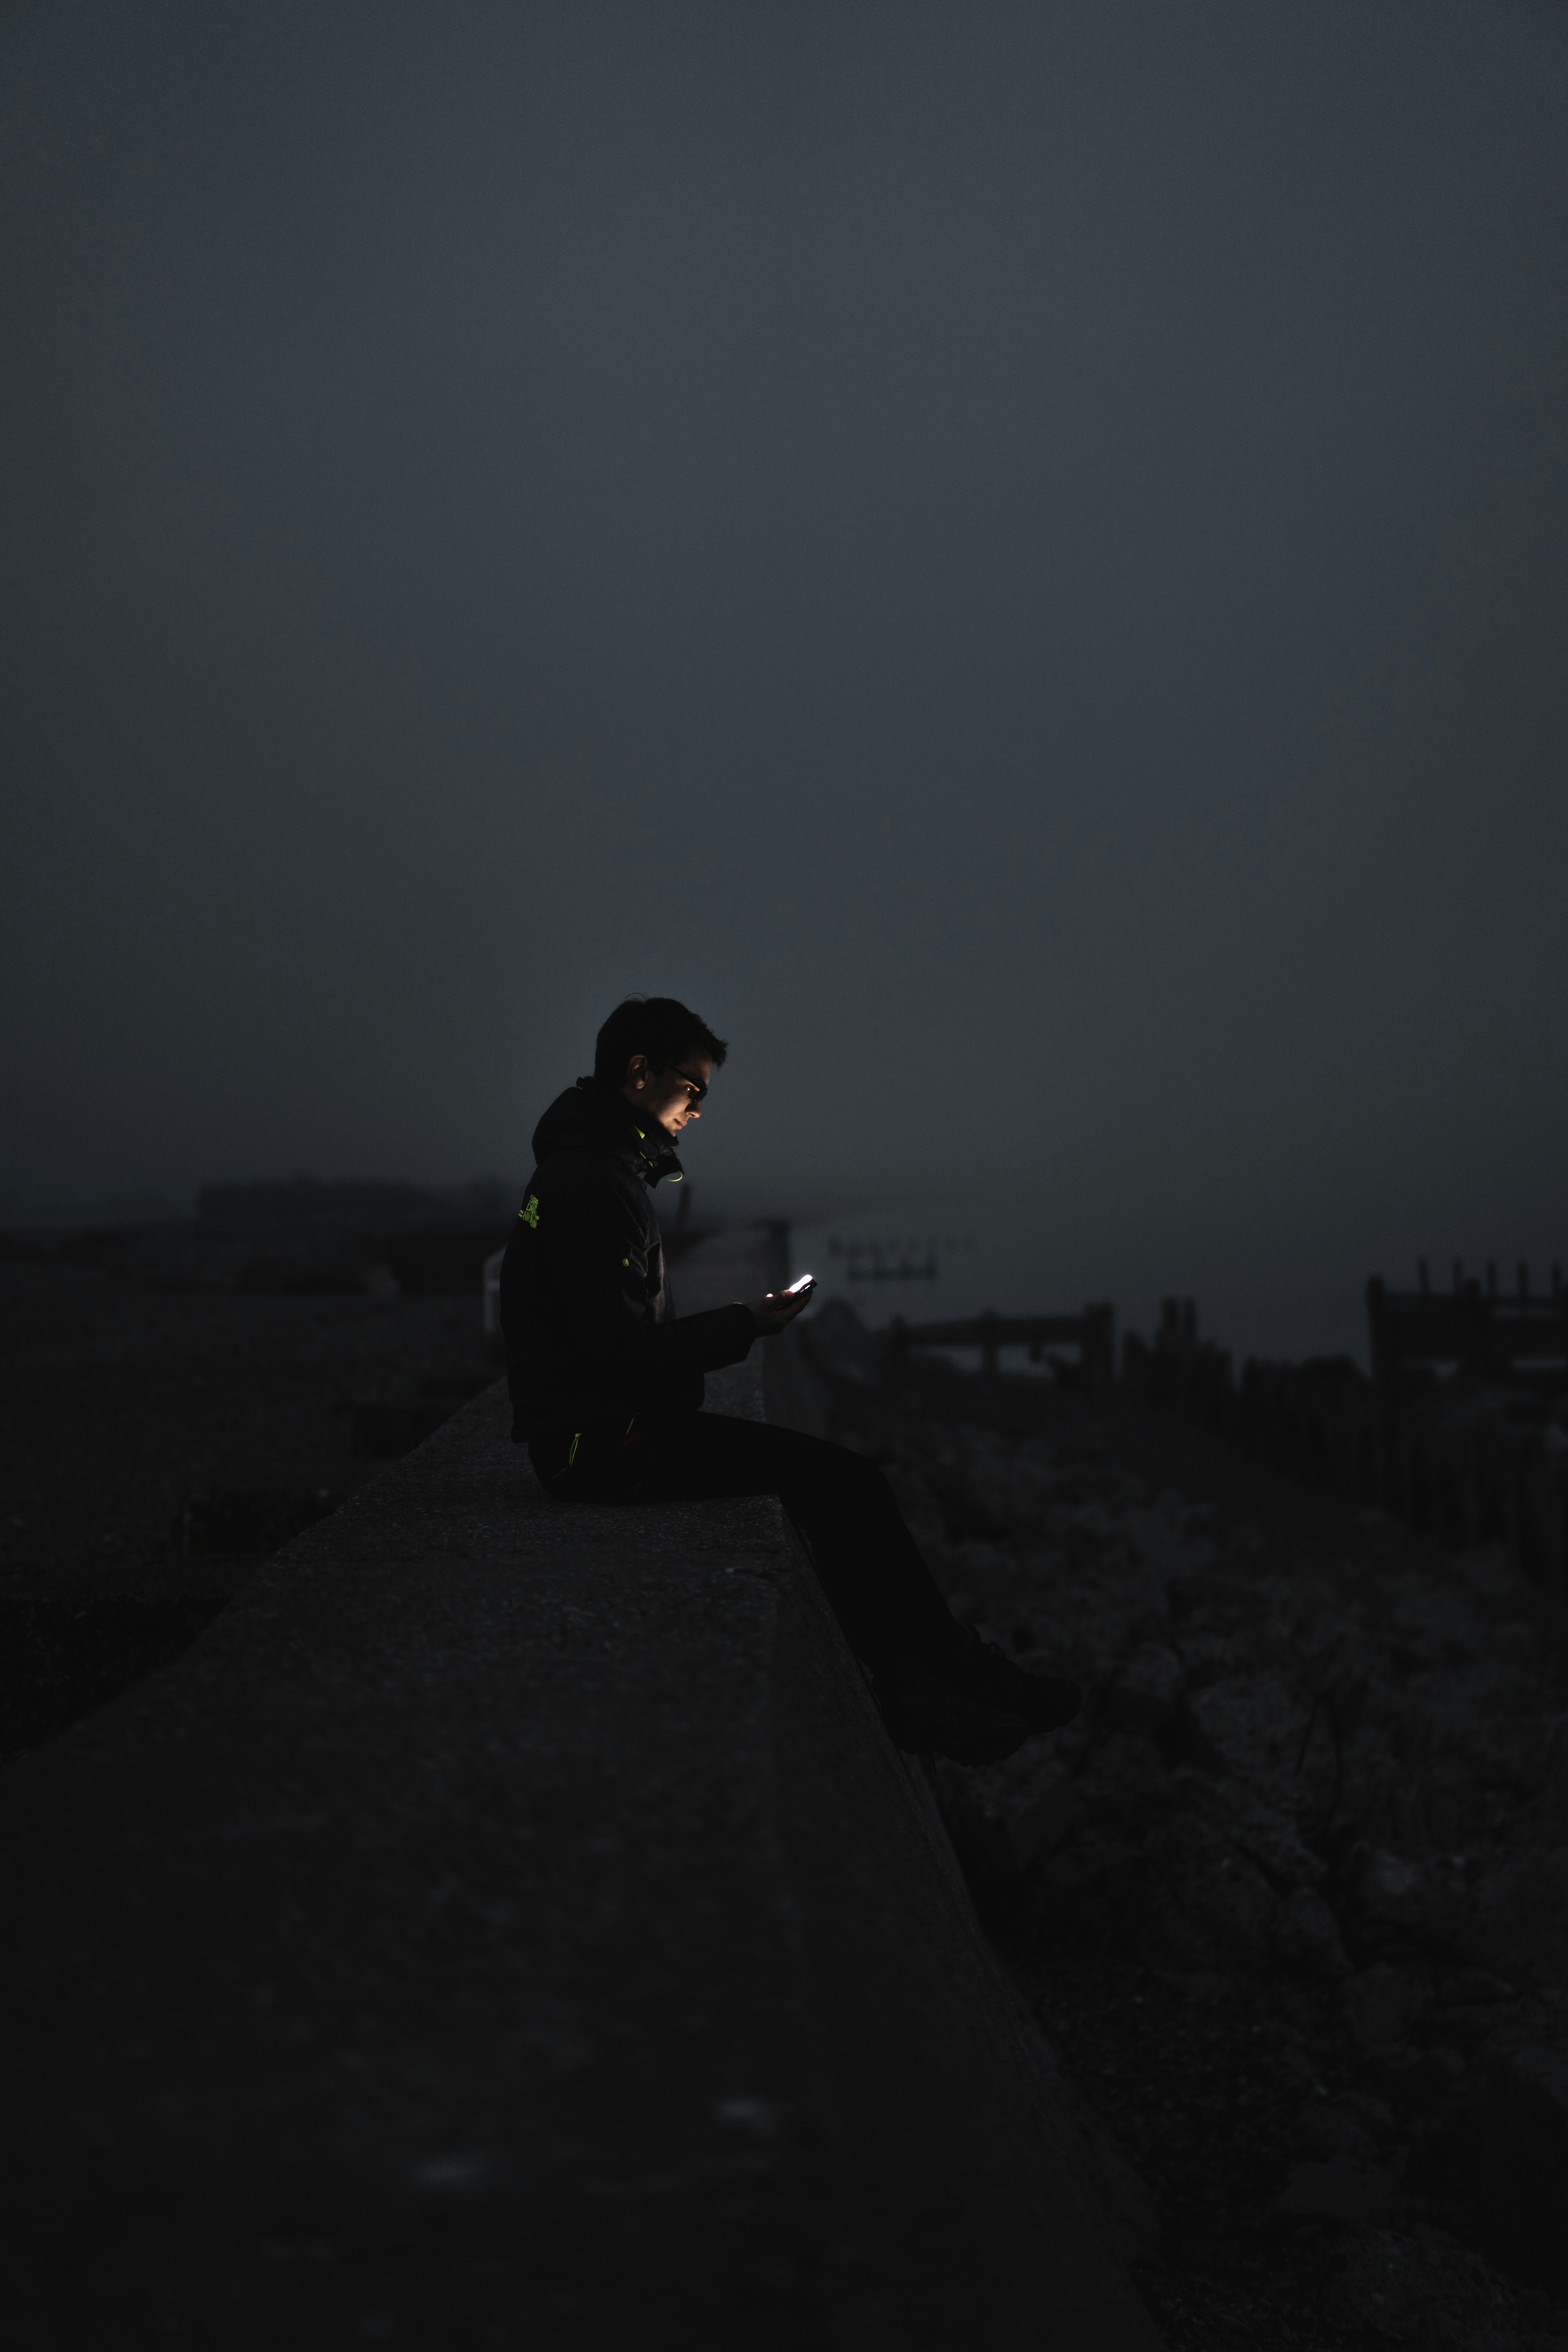 man in black jacket sitting on the ground during night time